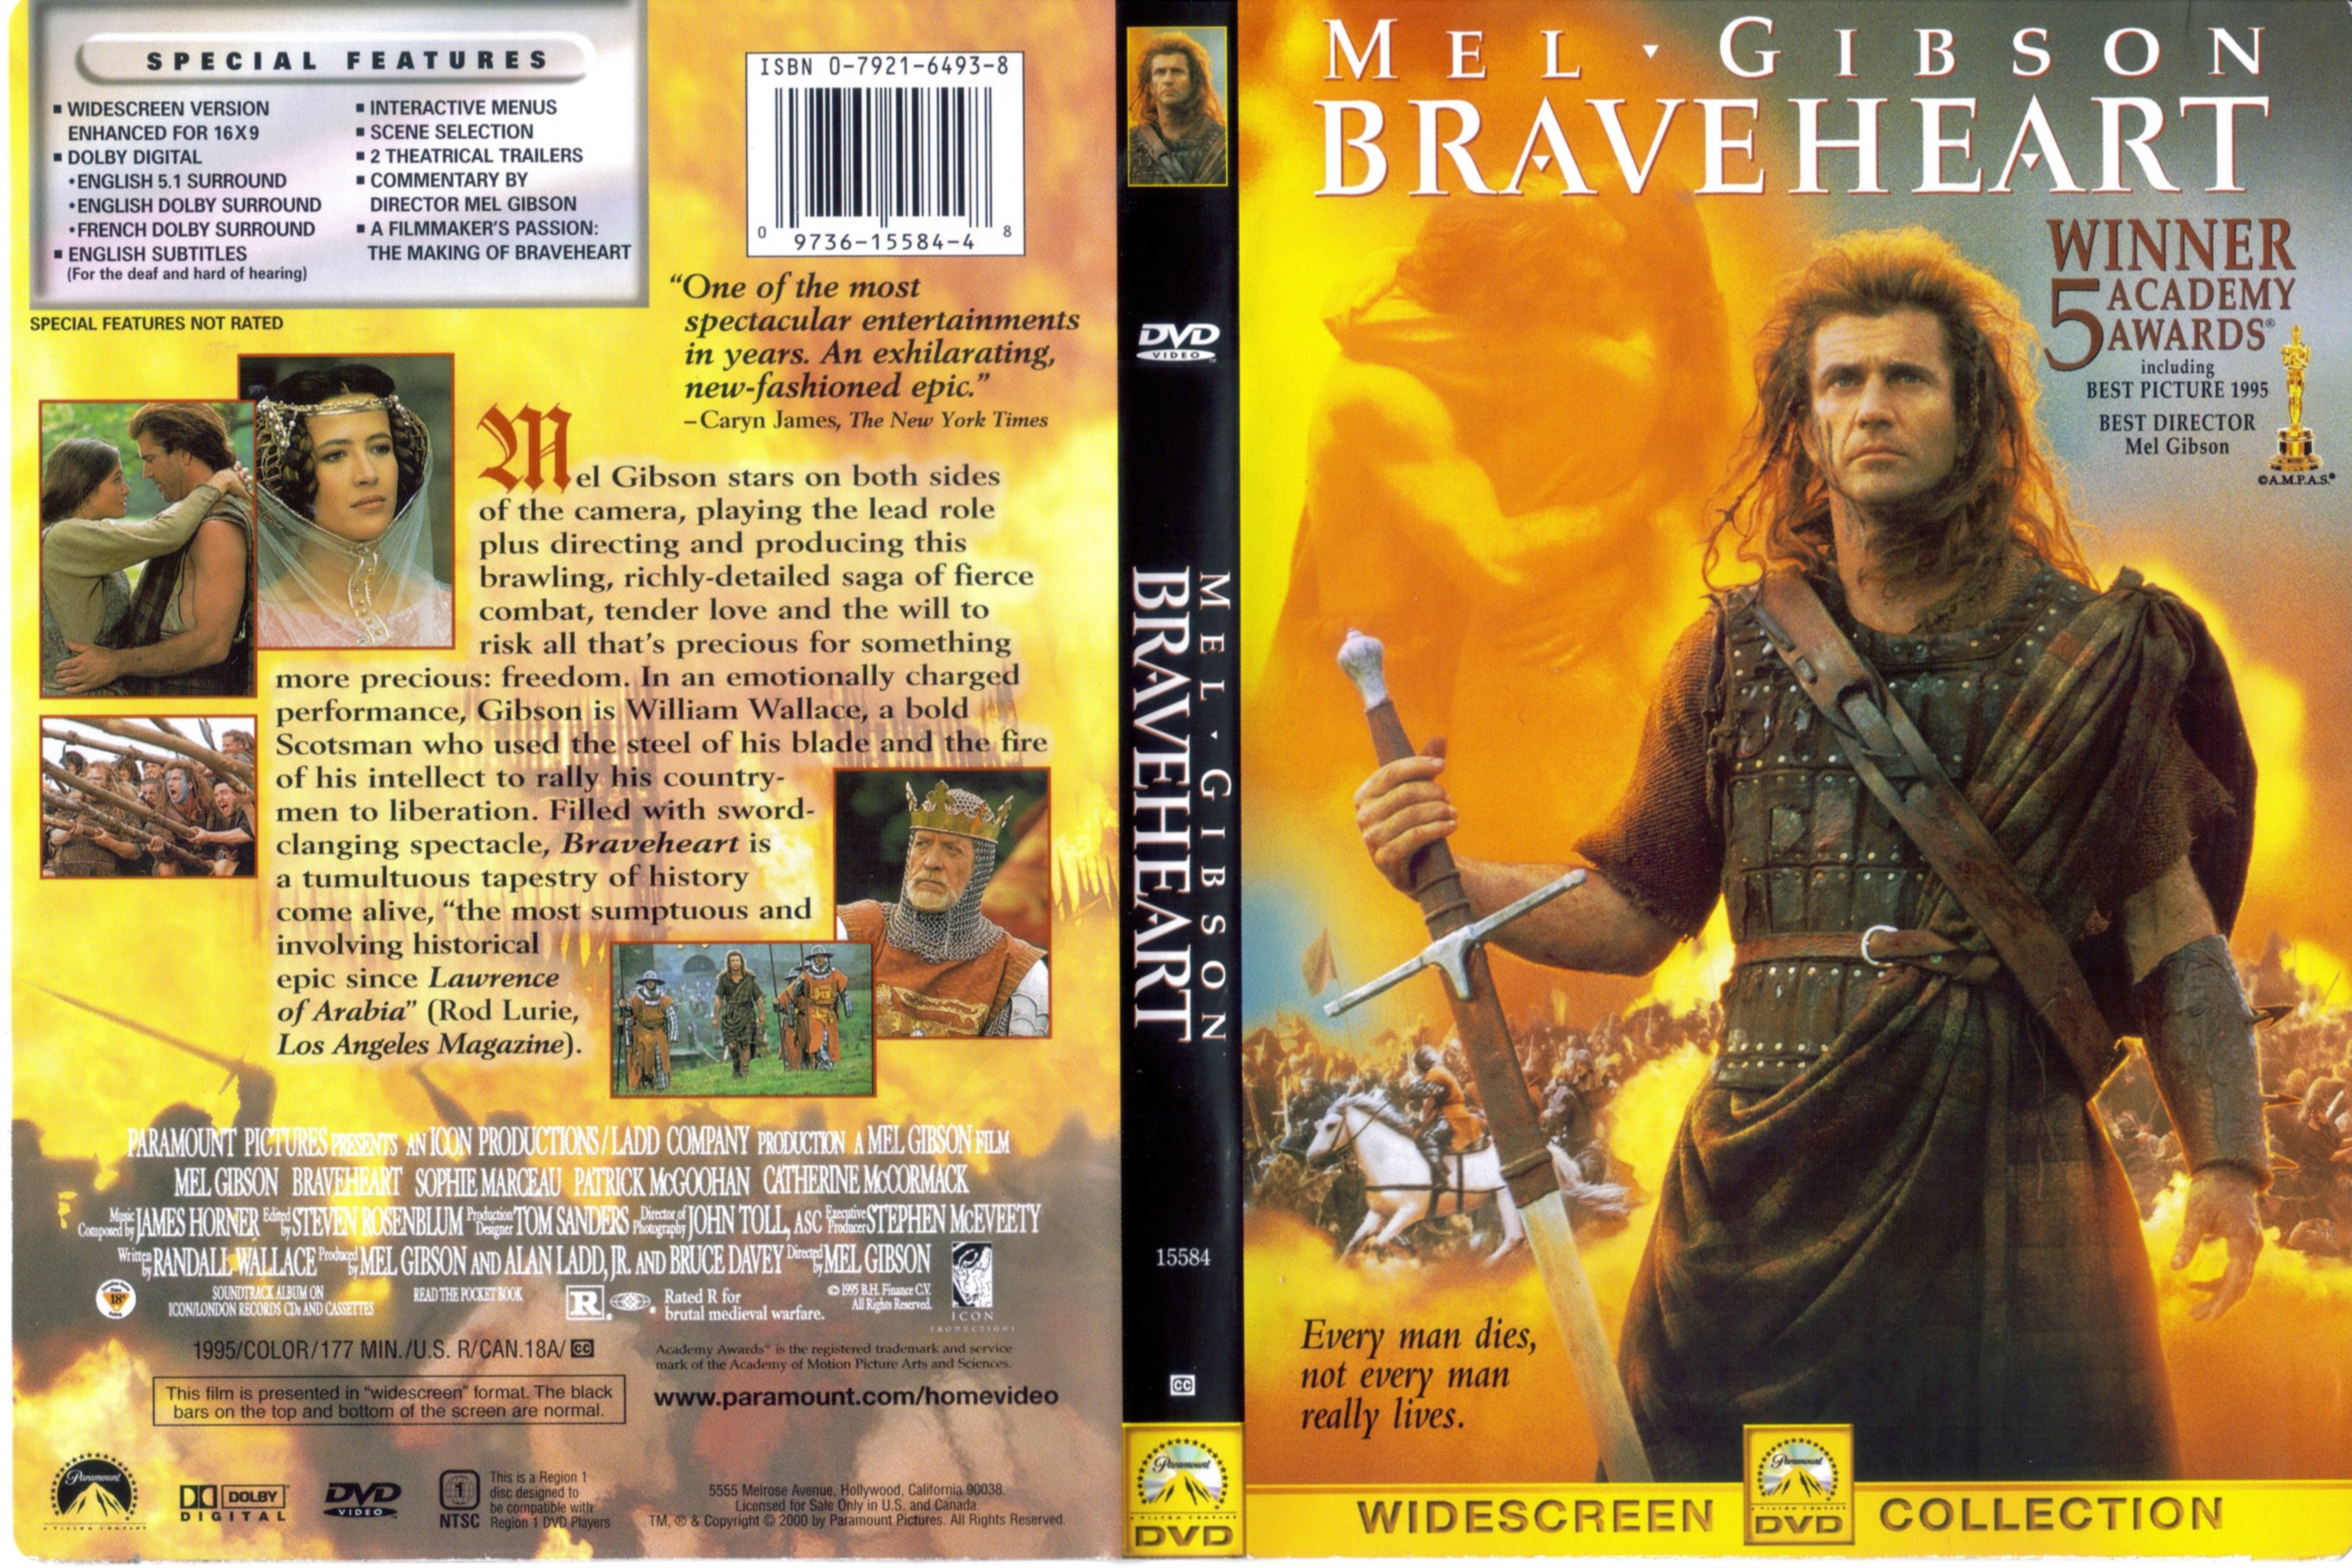 Jaquette DVD Braveheart (Canadienne)